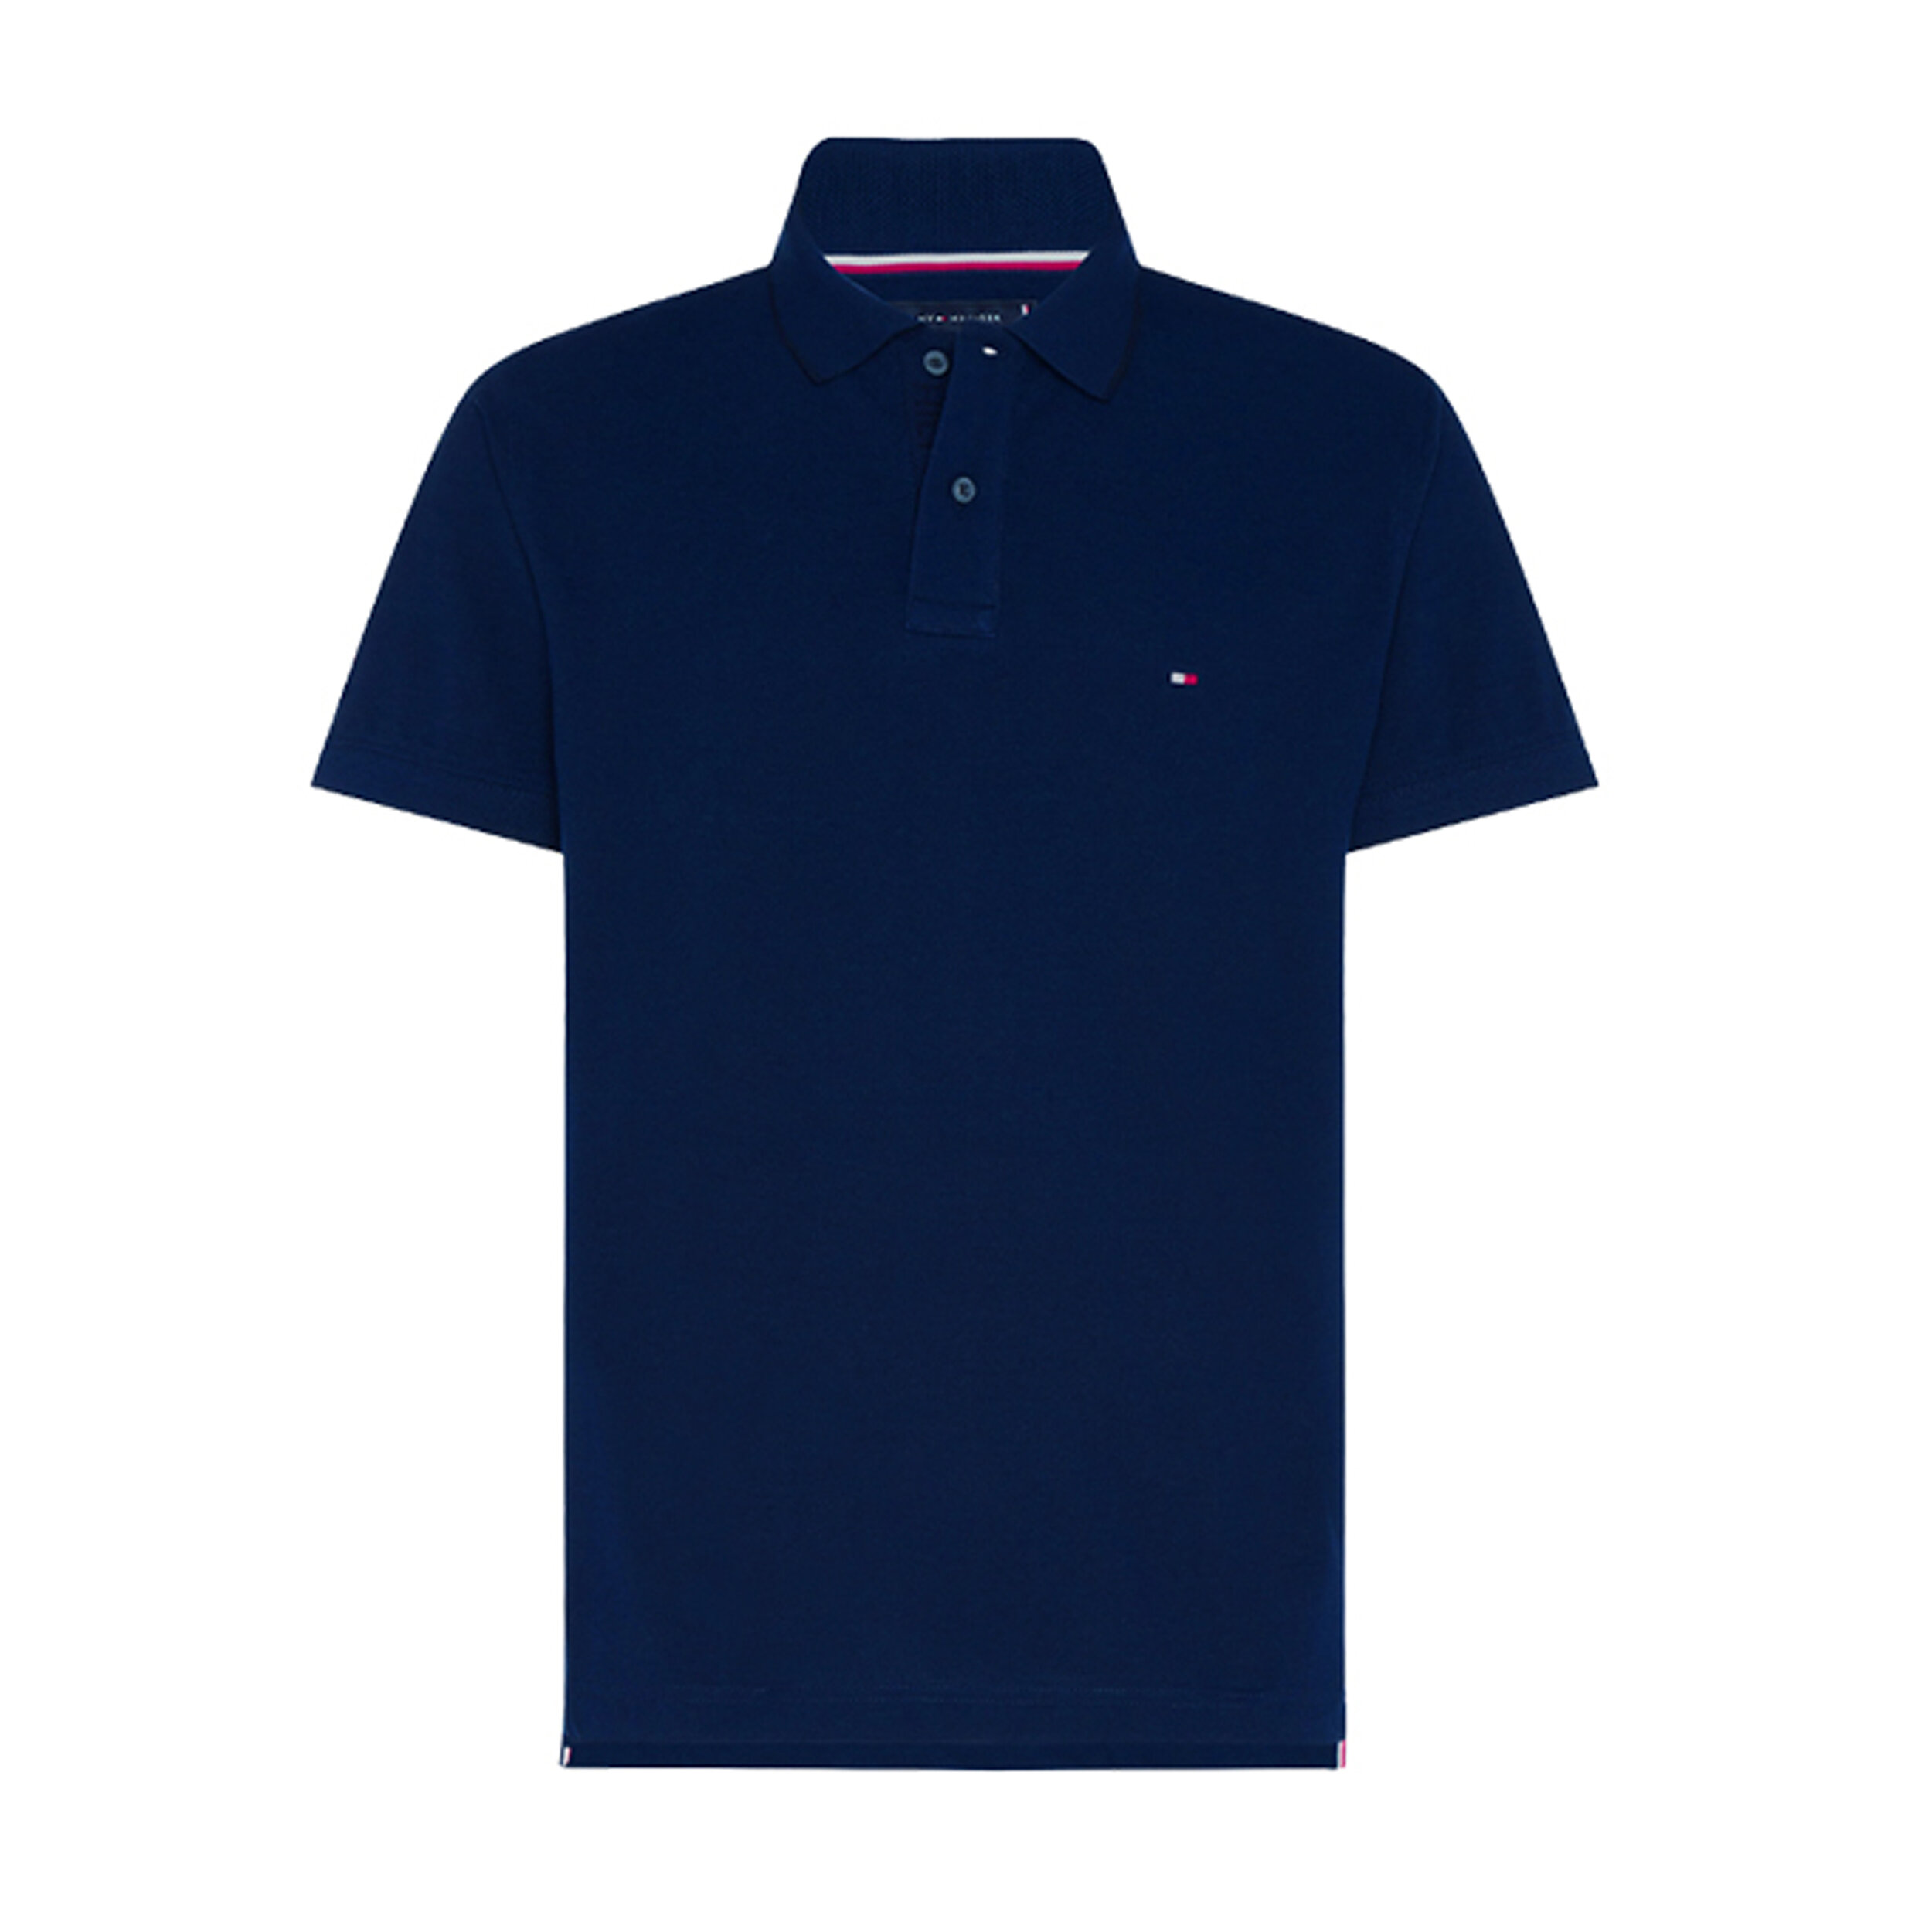  Placket Oxford Polo, Tommy Hilfiger P5,950 